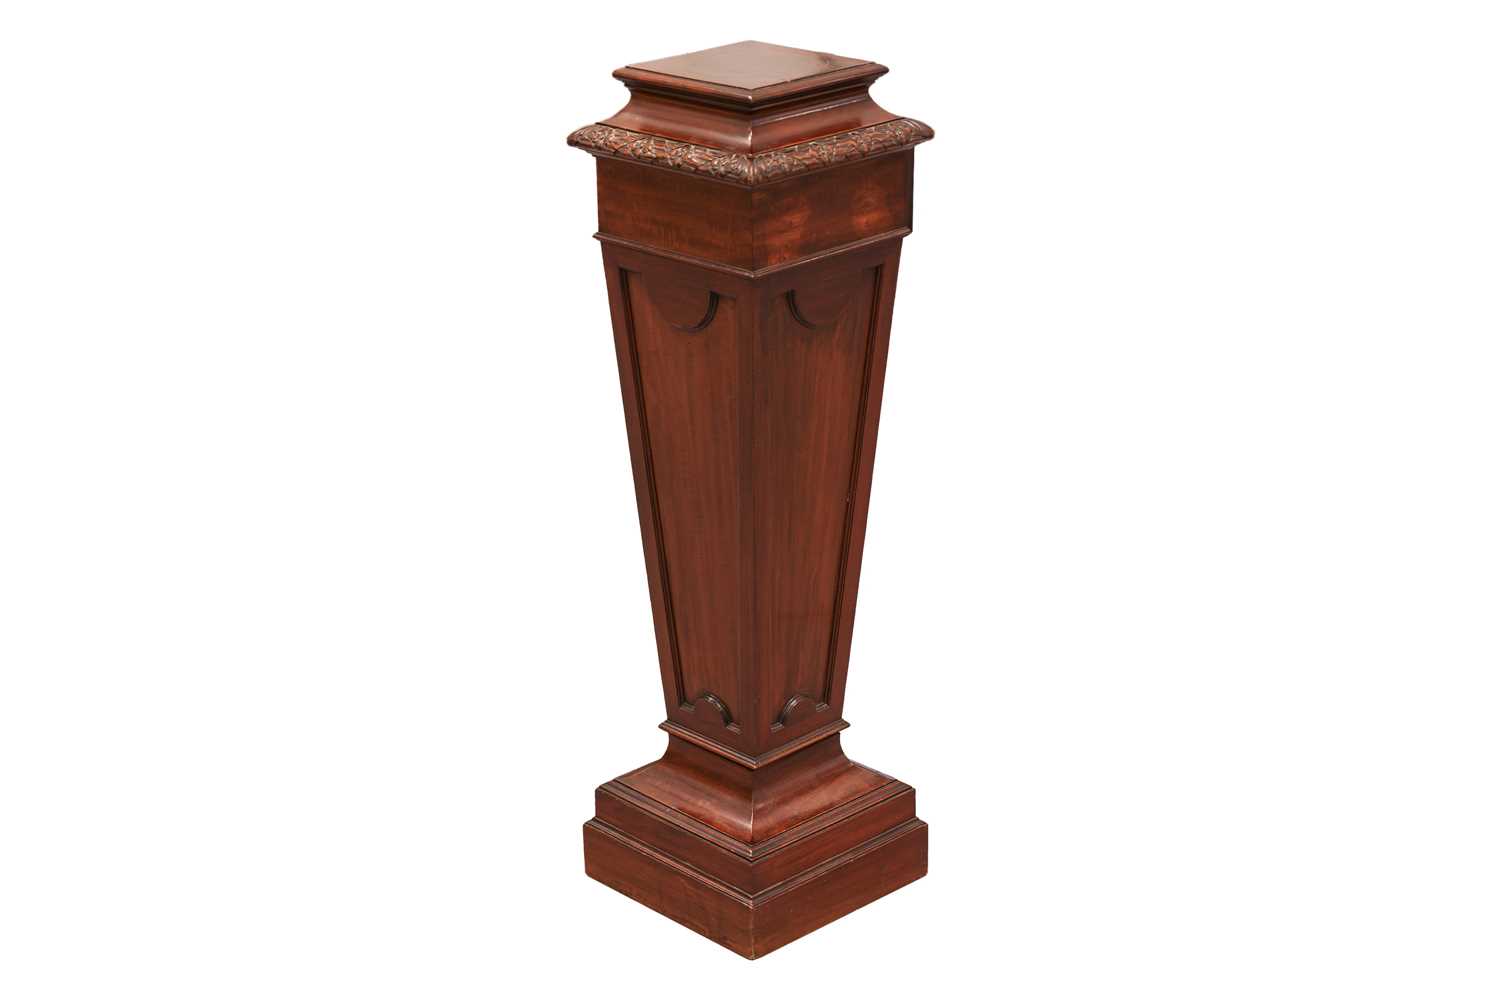 An Edwardian mahogany square section pedestal of Neo-Classical form with decorative carved and mould